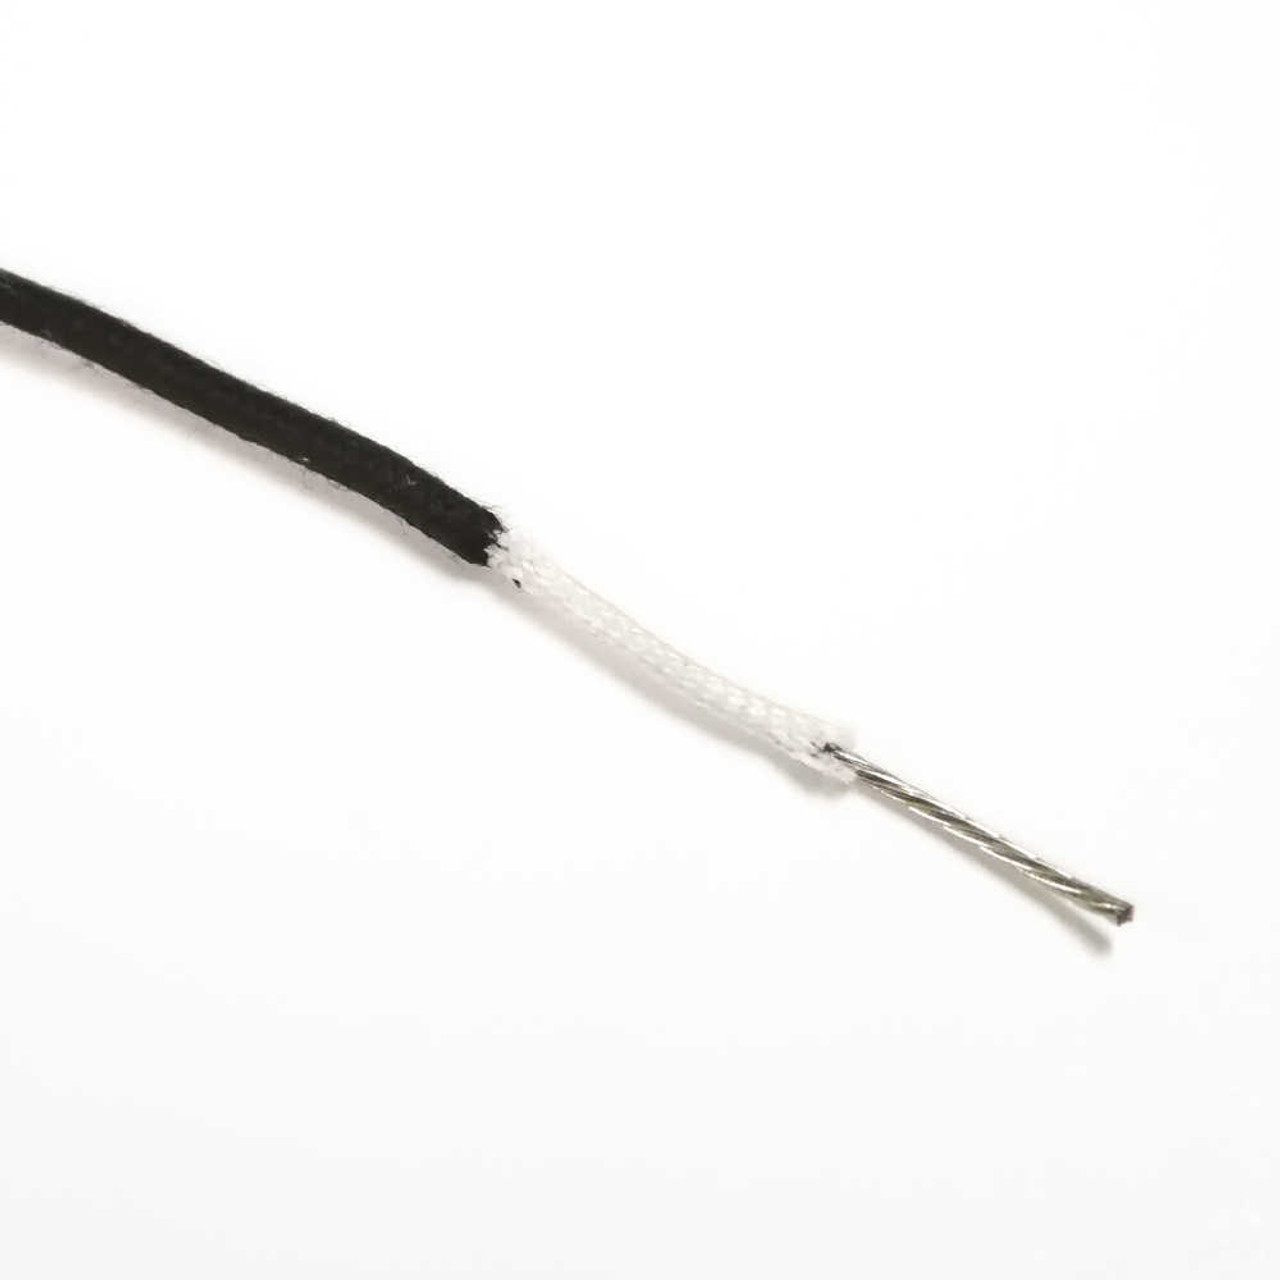 Hookup Wire - 18AWG Stranded Cloth Covered Black - By Foot